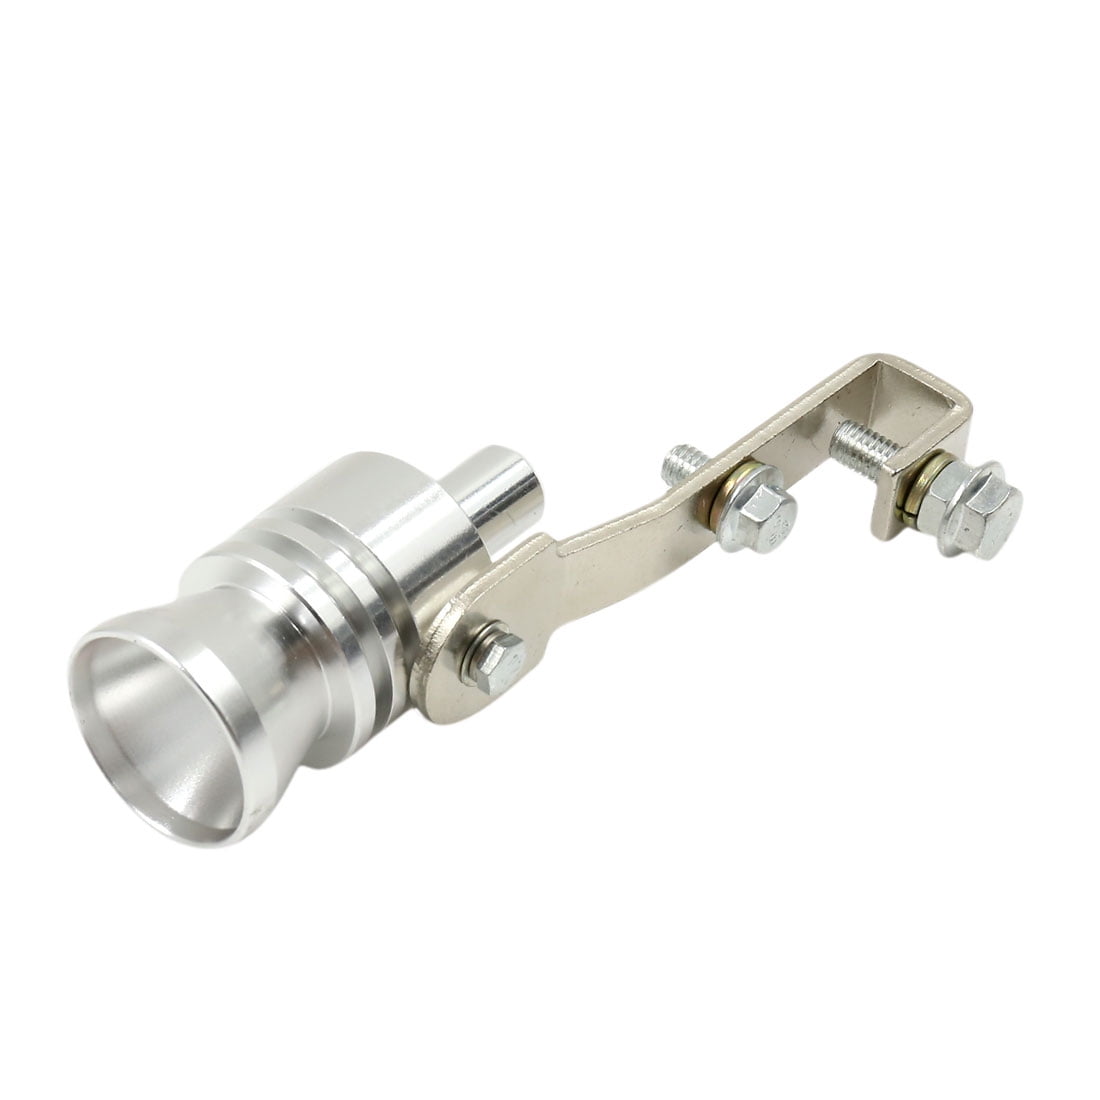 Stainless Steel Turbo Sound Exhaust Muffler Pipe Whistle at Rs 150